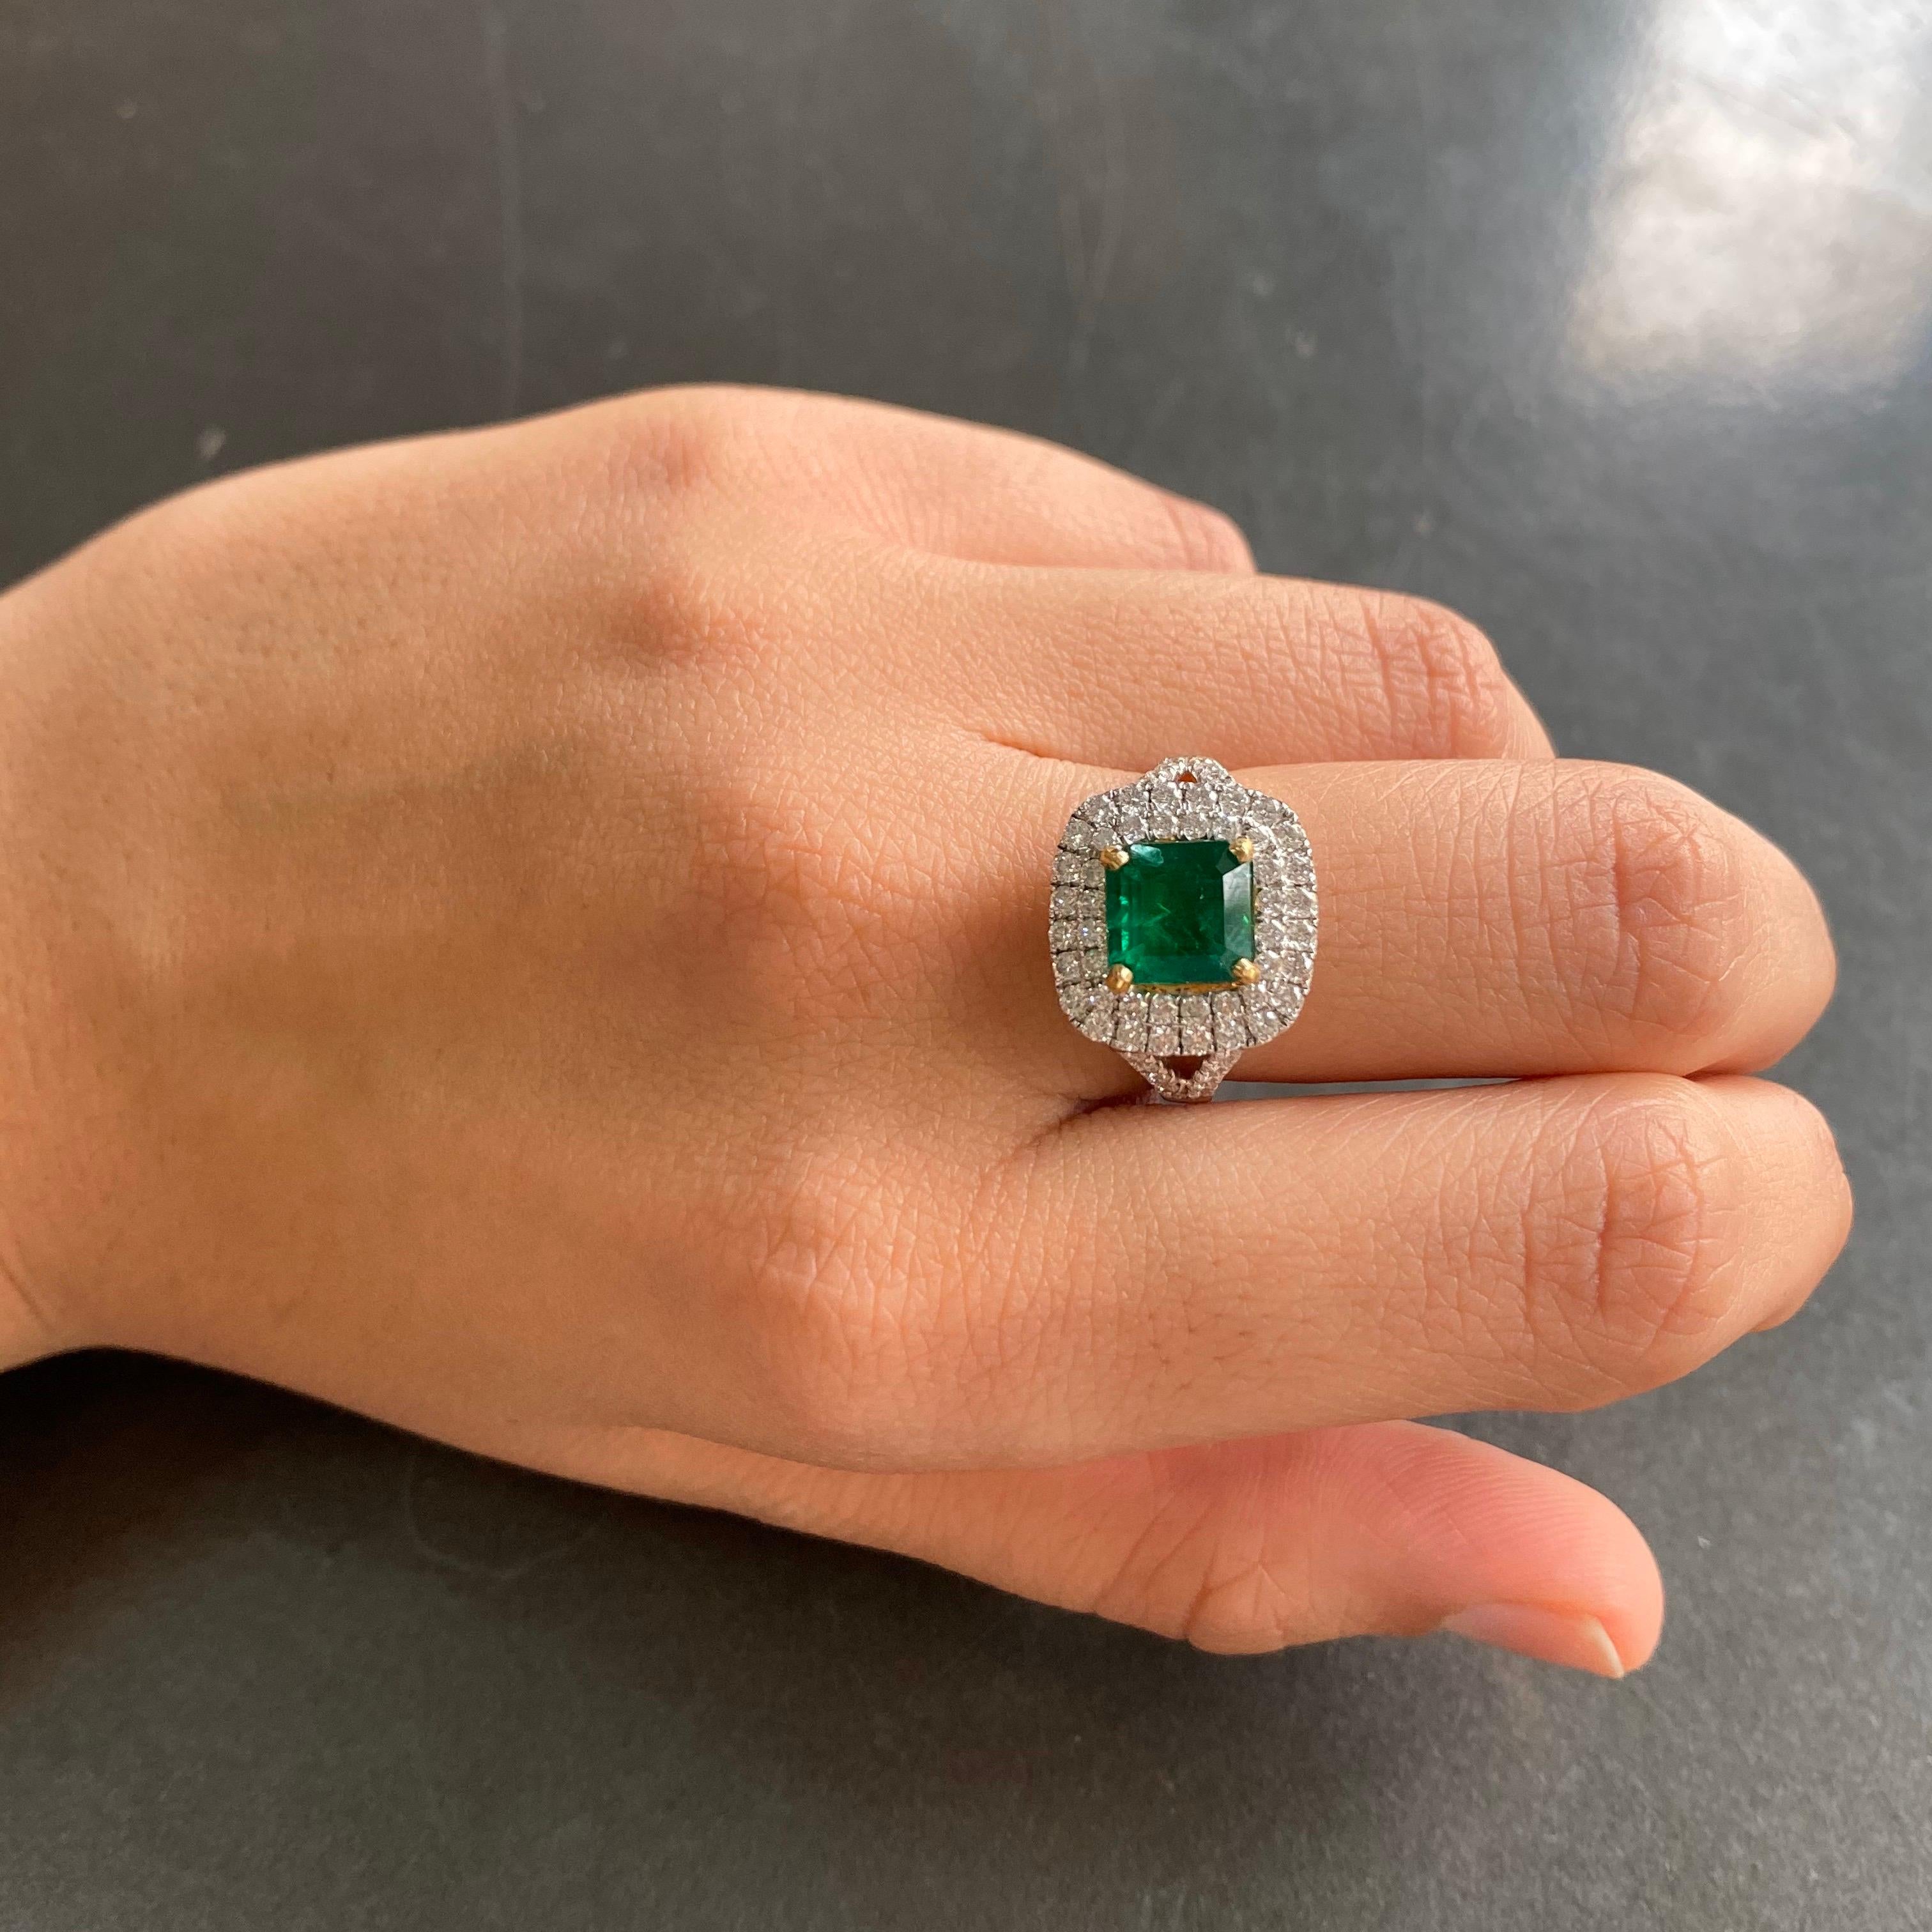 A beautiful 1.93 carat Zambian Emerald and Diamond ring set in 18K white gold. 
The stone is transparent, with very few natural inclusions, and a beautiful lustre. The pictures depict the actual colour/quality of the centre stone. Currently a ring